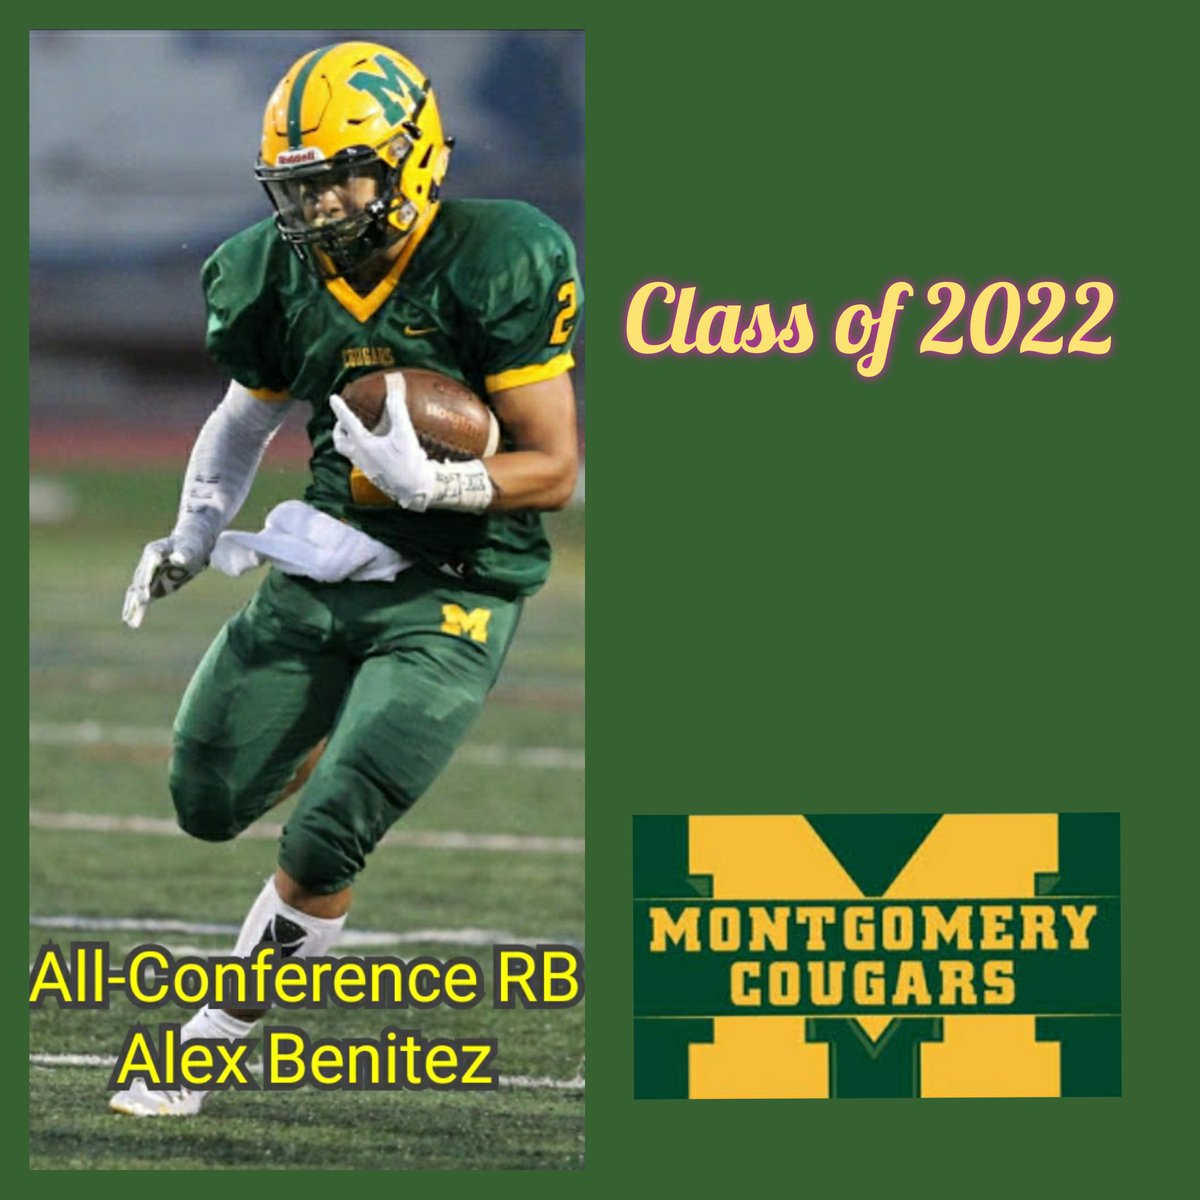 Correction‼ Alex Benitez scored 4 rushing TDs today makes him the school's all time leading rusher with 20. Breaking the record of 17 shared by Ryan Boyle Class of 2013 and Jared Reinson Class of 2017! @MontyAthletics @alex_benitez2 @CoachEAllen21